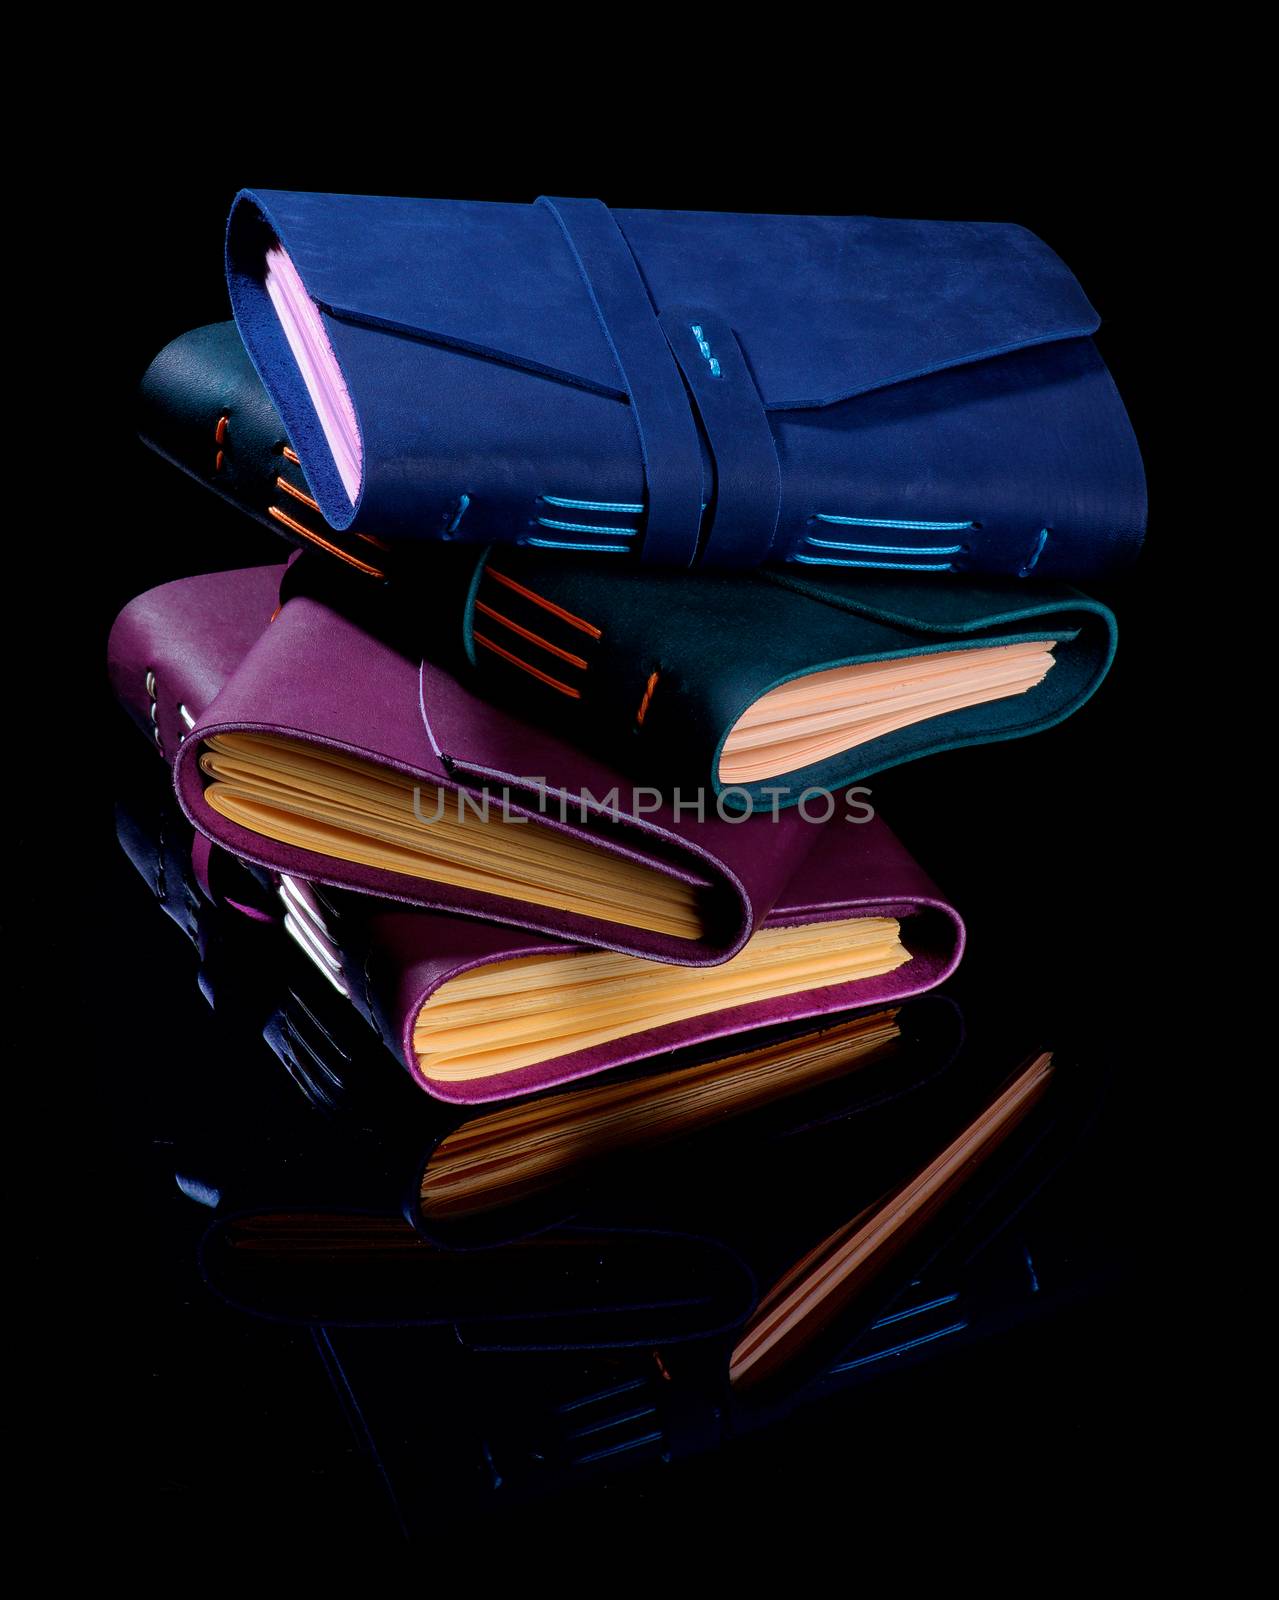 Stack of Luxury Handmade Leather Notepads with color Craft Paper isolated on Black background